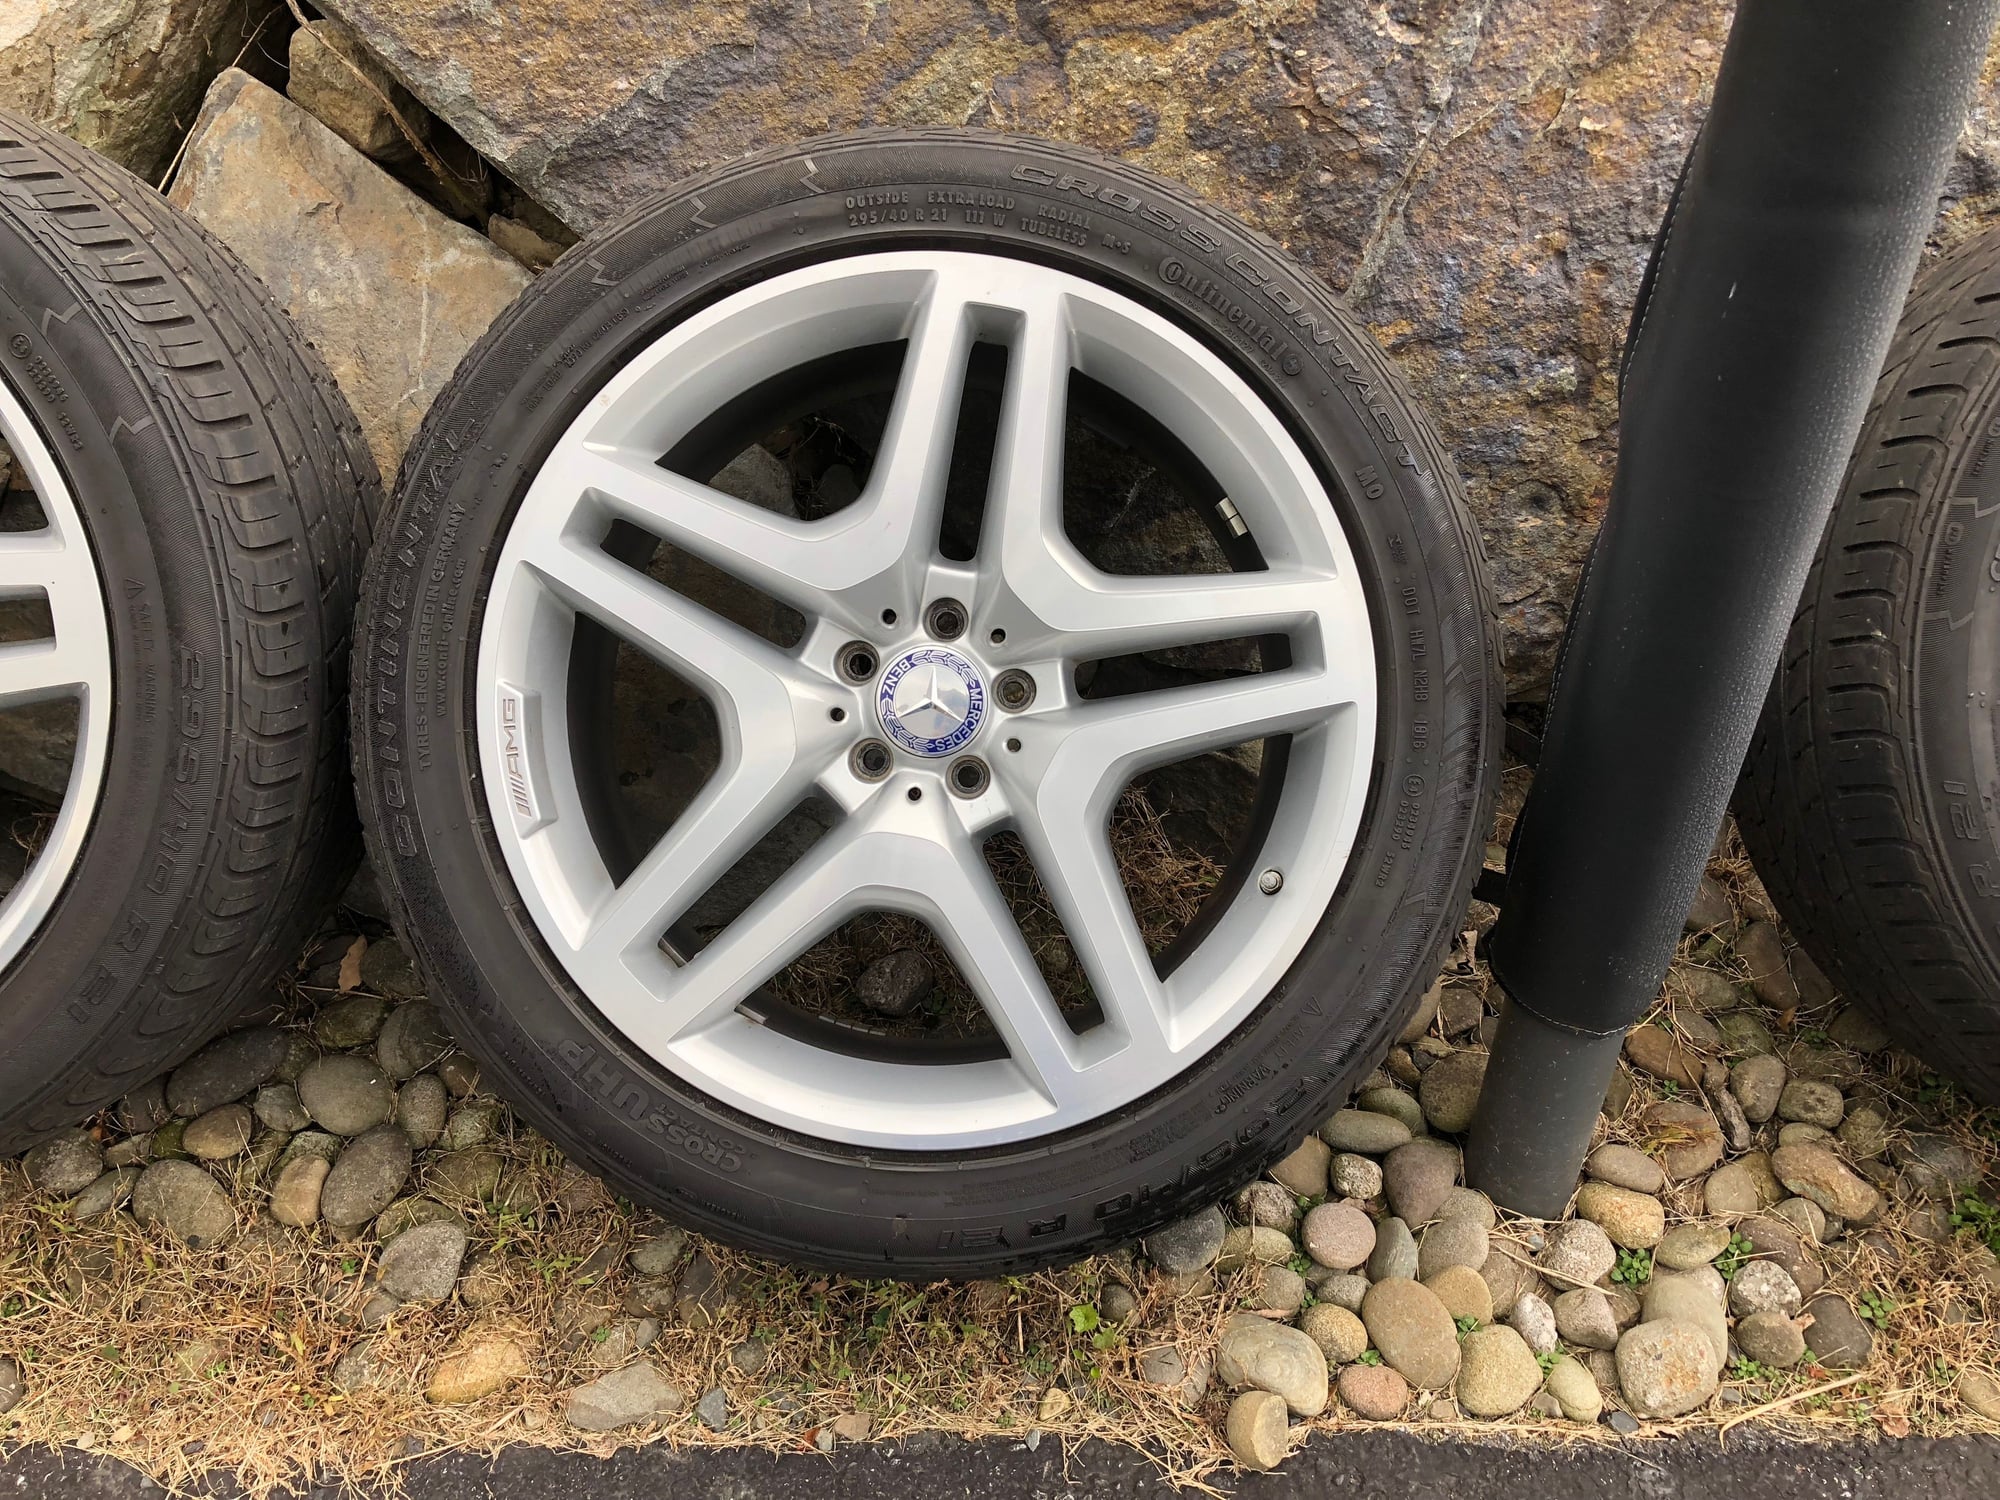 Wheels and Tires/Axles - 21 AMG Wheel Set from my GL OEM with Continental Tires - Used - 2013 to 2019 Mercedes-Benz GL550 - 2013 to 2019 Mercedes-Benz GL63 AMG - Highland Mills, NY 10930, United States